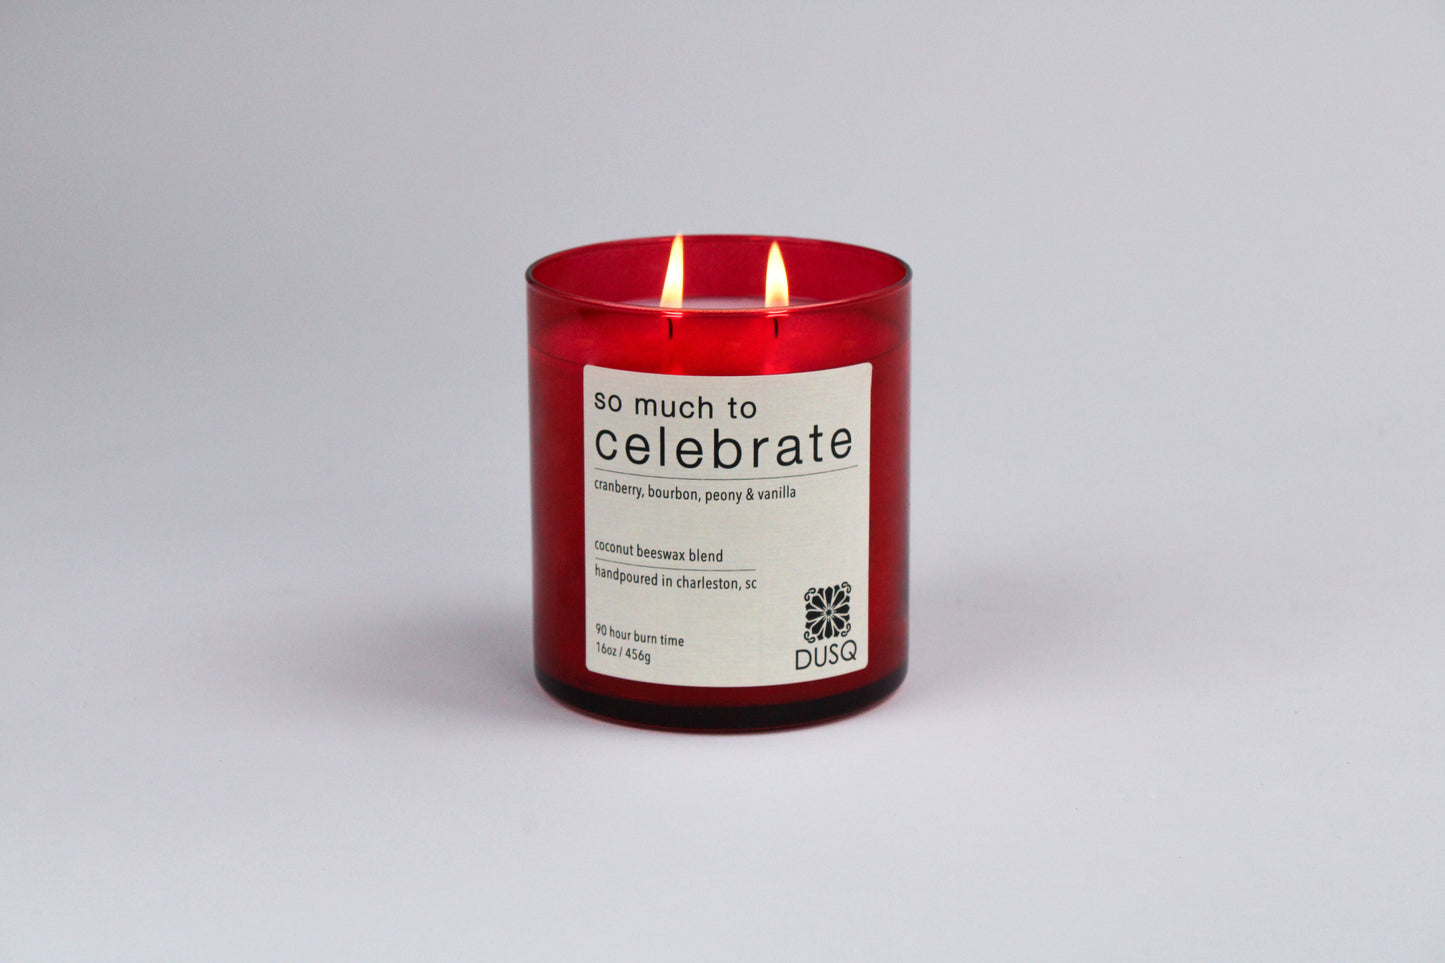 Coconut Beeswax Blend Indoor Candle I “So Much to Celebrate” Scent I Red Glass Candle 16oz